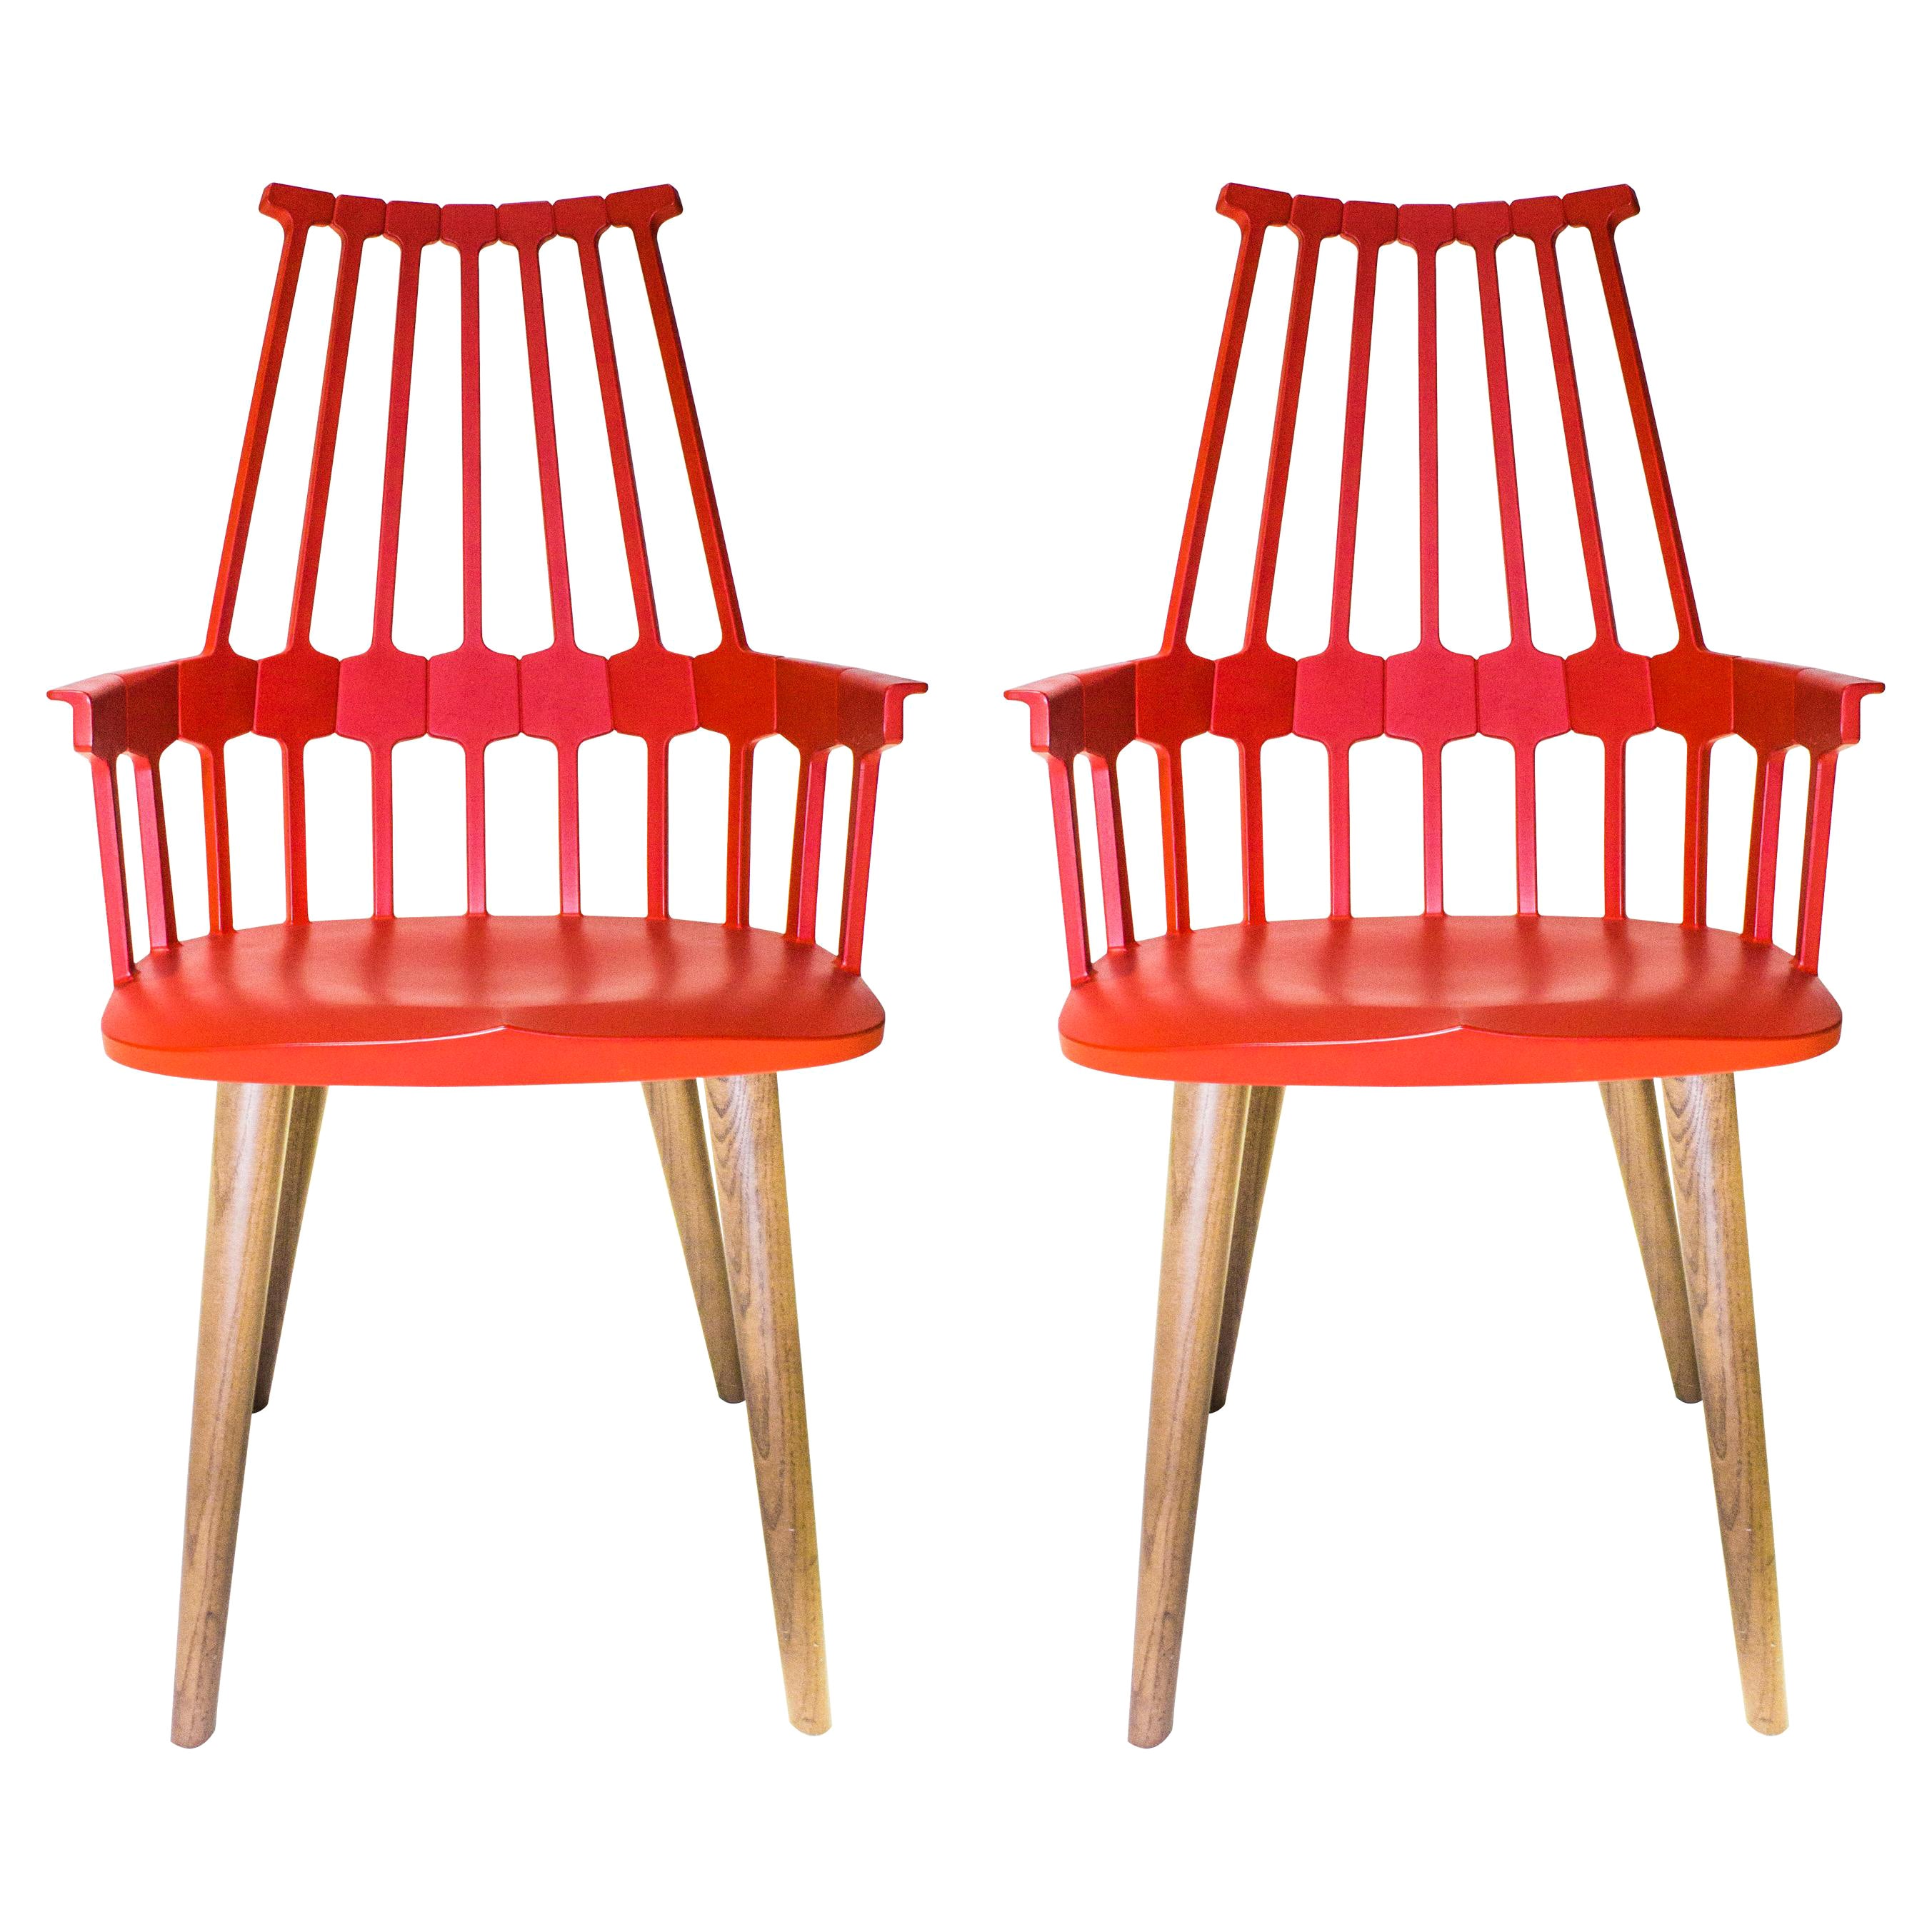 Set of 2 Kartell Comback Chairs in Orange Red with Oak Legs by Patricia Urquiola For Sale